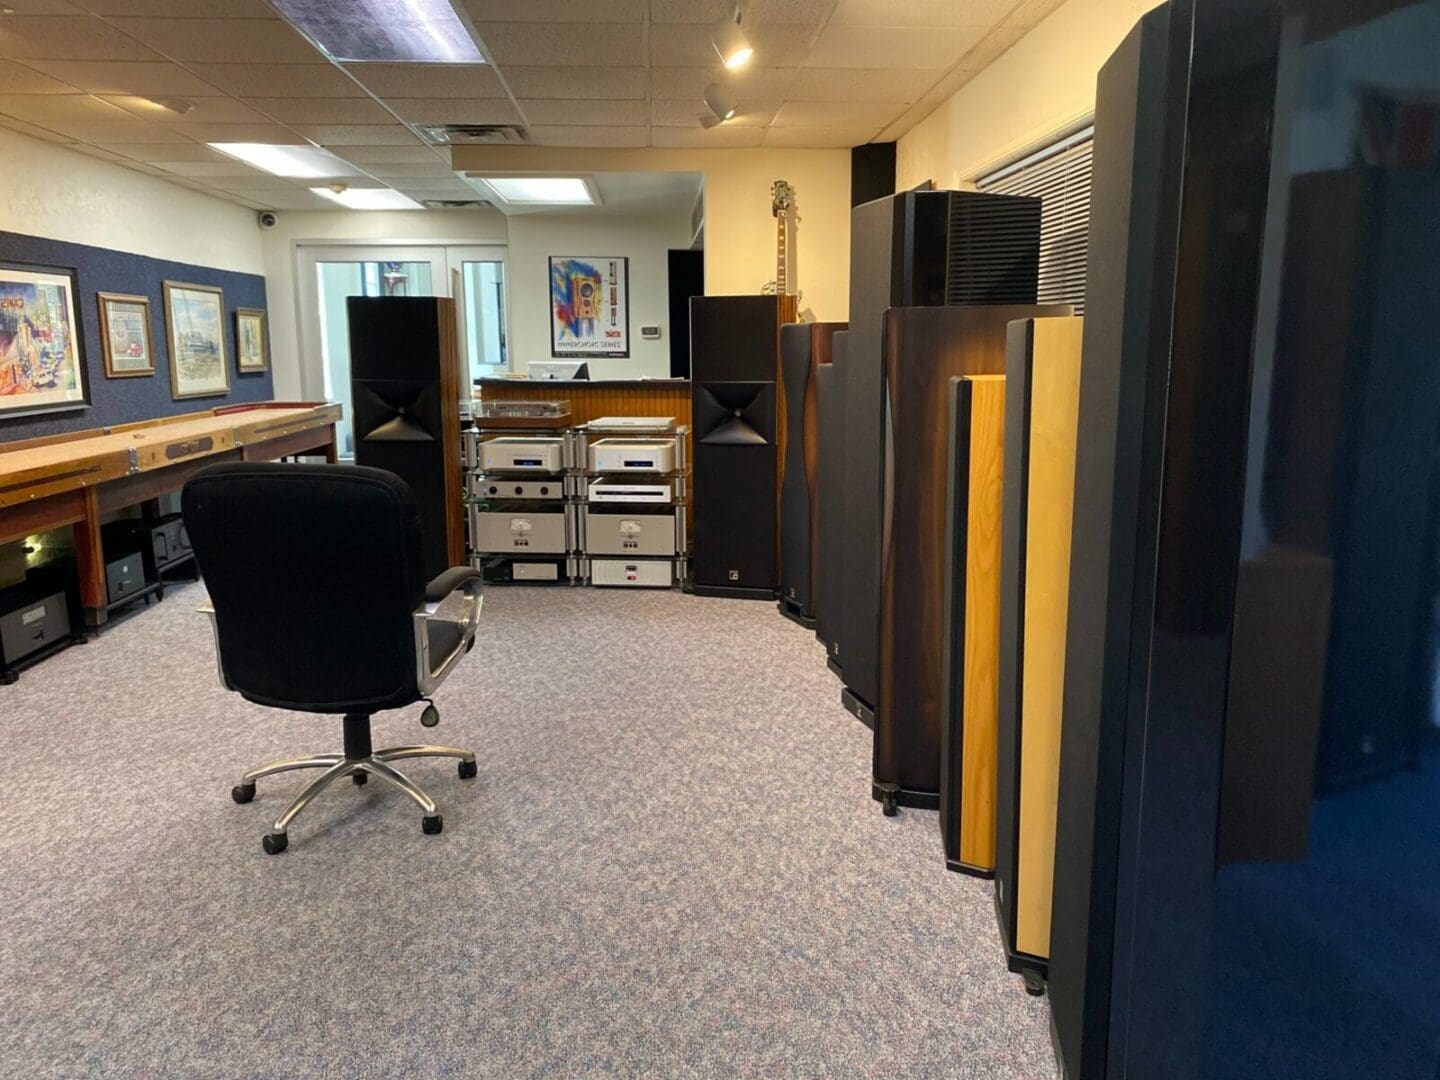 One of The Sound Station's listening rooms